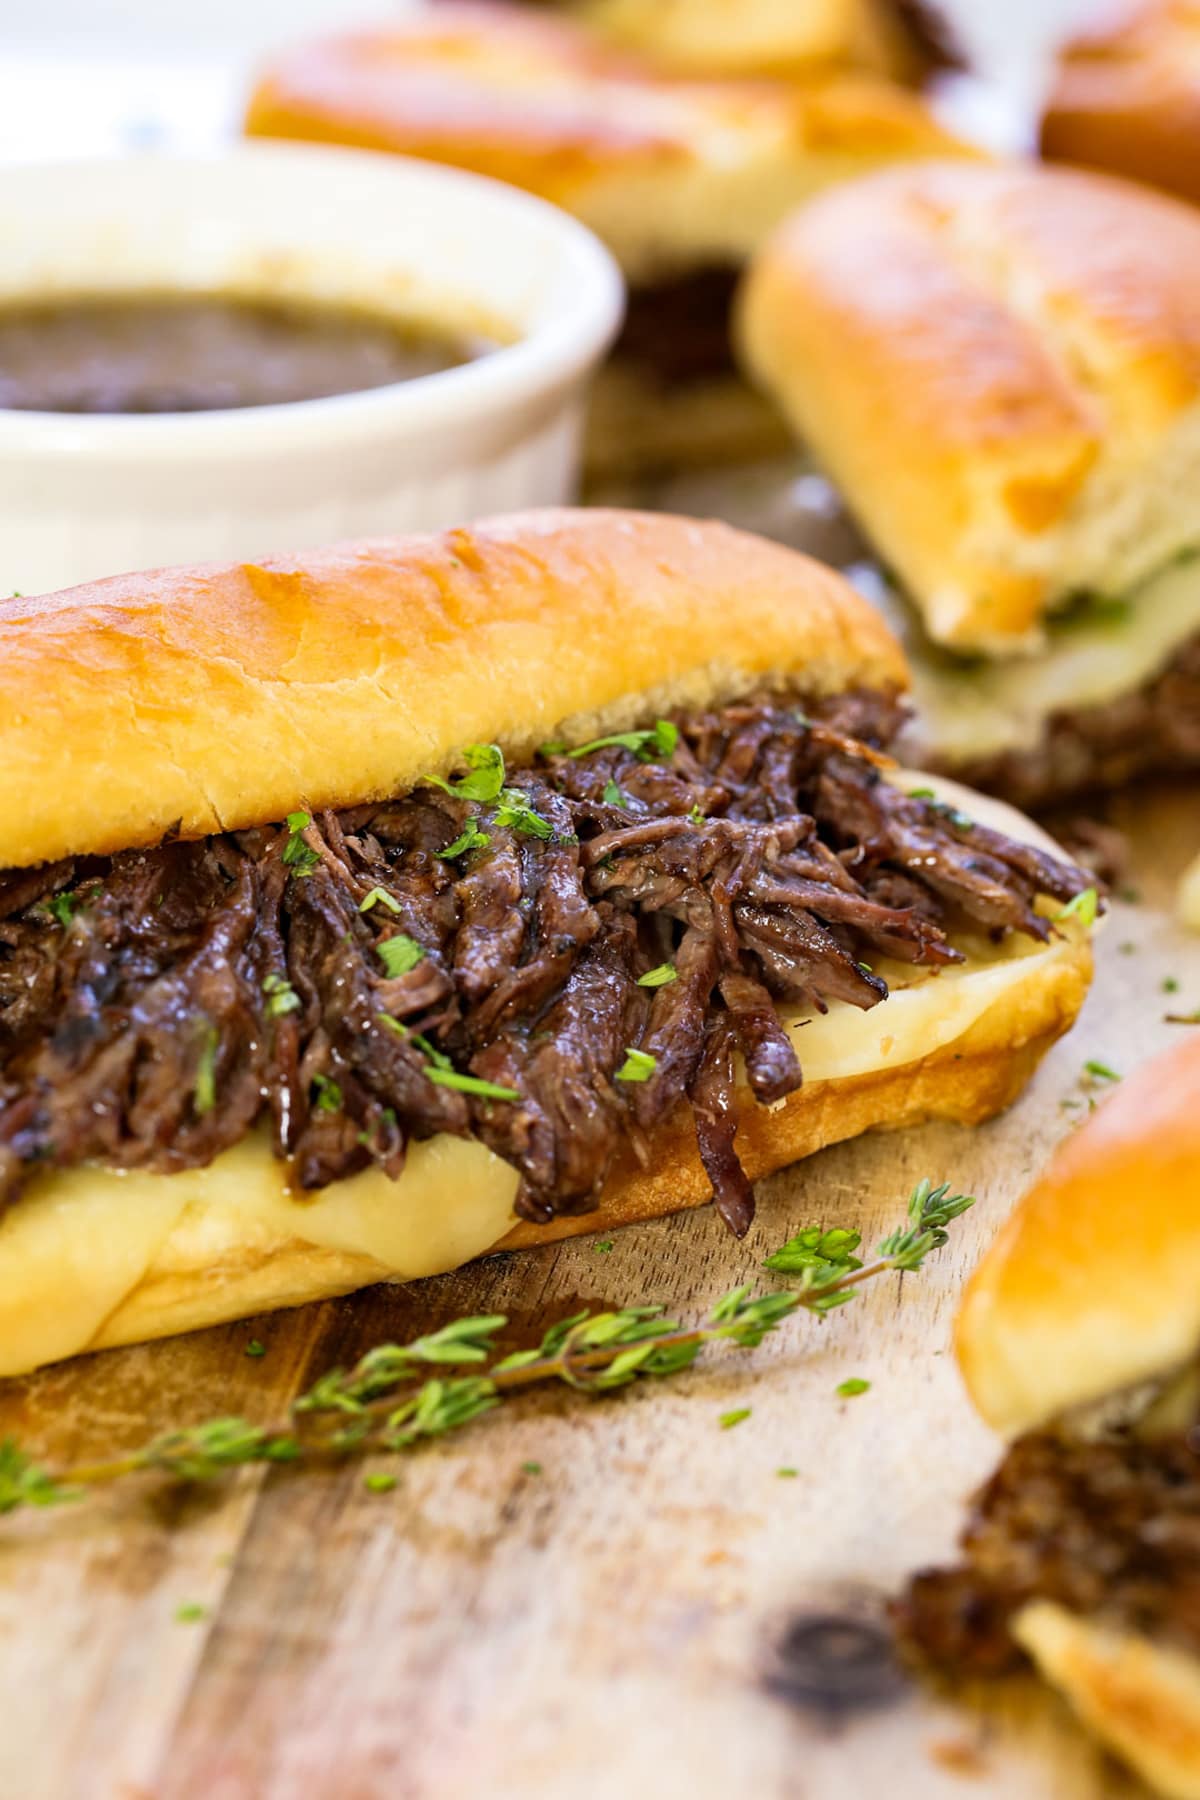 A French dip sandwich without cheese